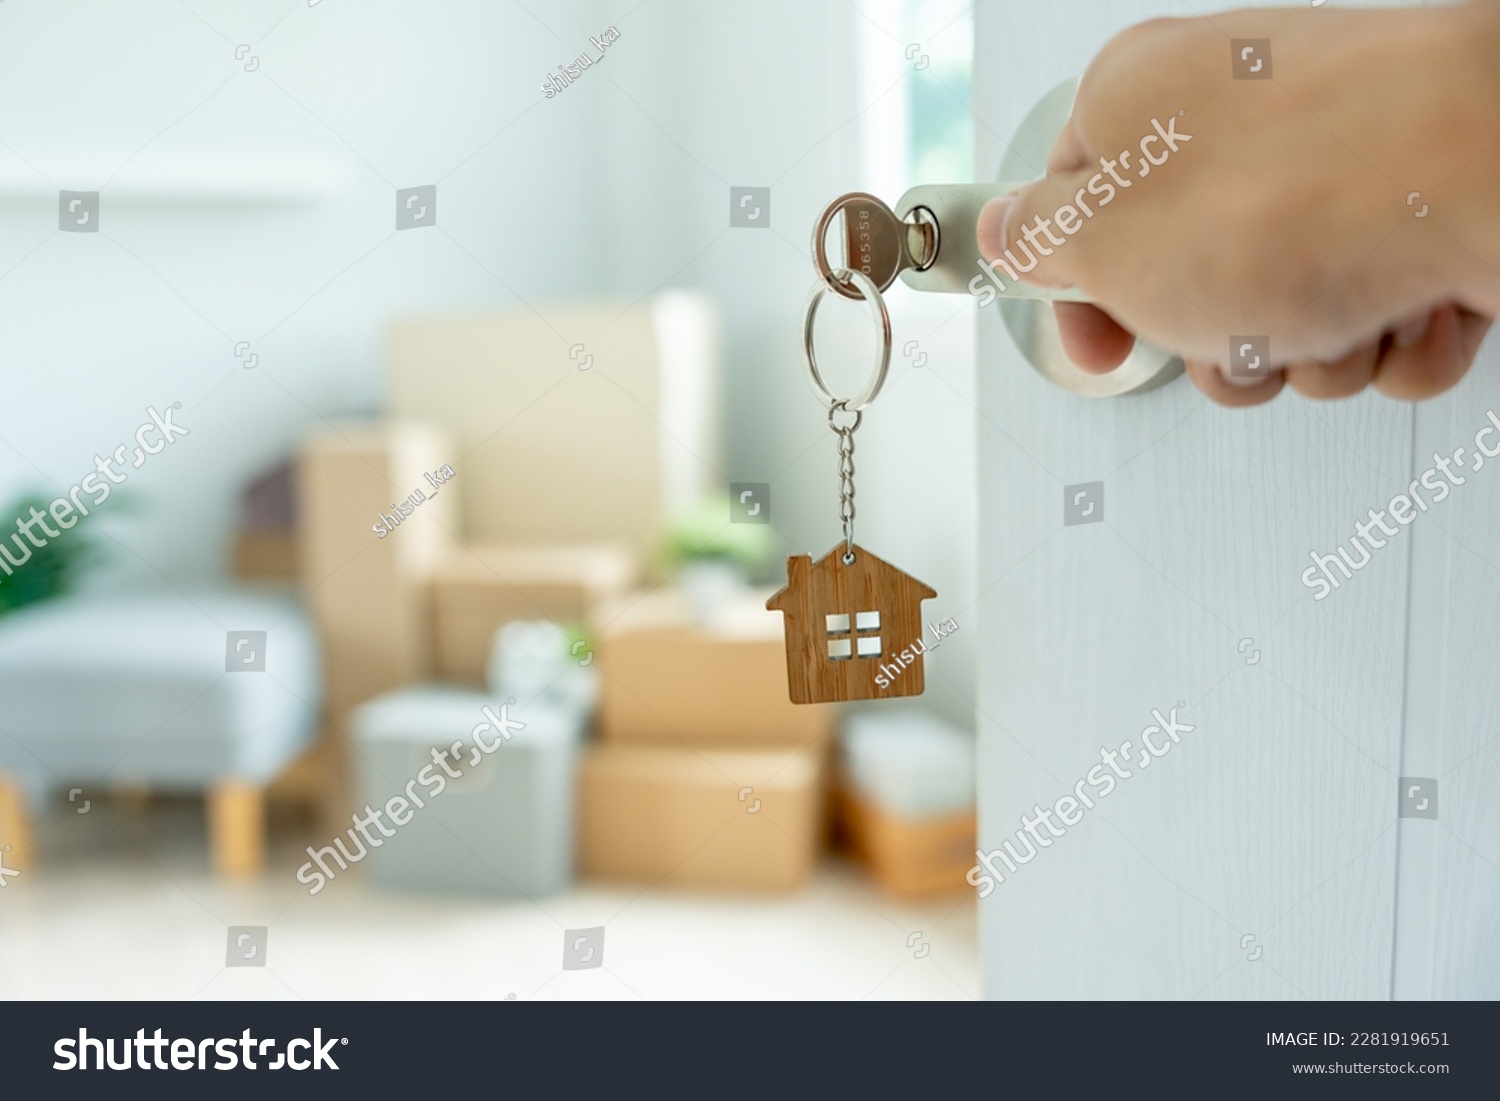 stock-photo-moving-house-relocation-the-key-was-inserted-into-the-door-of-the-new-house-inside-the-r